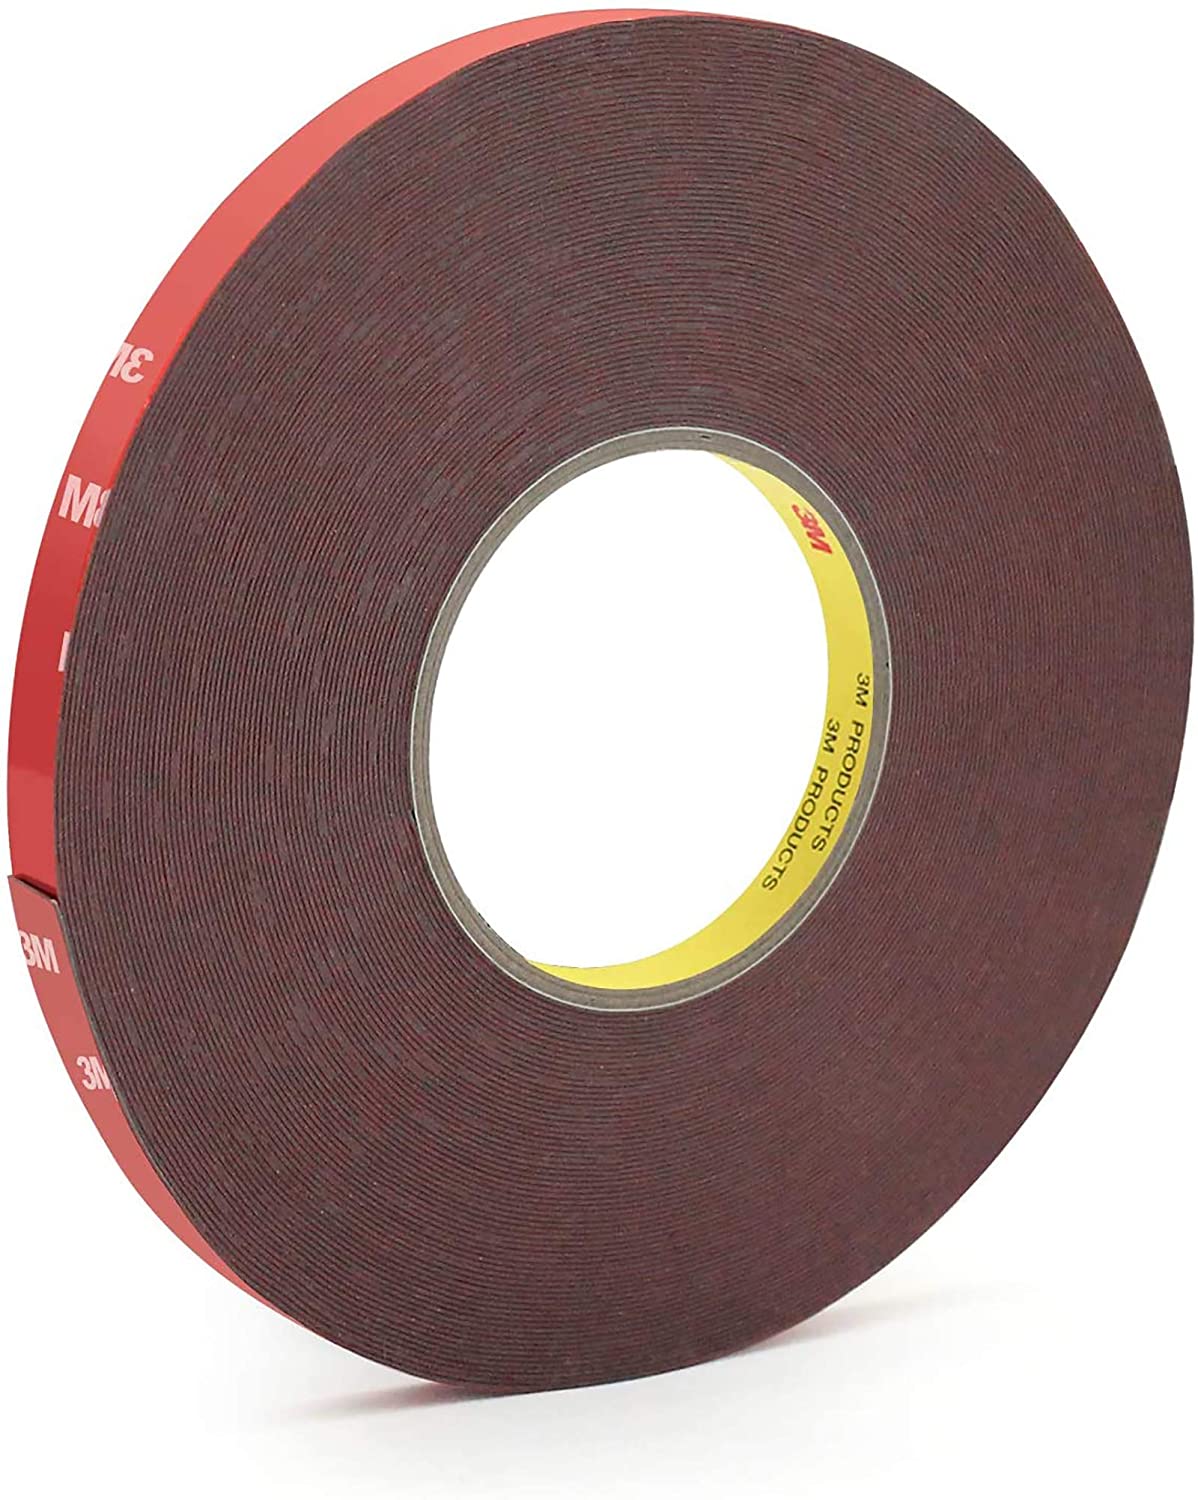 3M VHB™ Double Sided Tape Extra Strong 3M Adhesive Mounting Tape Heavy Duty